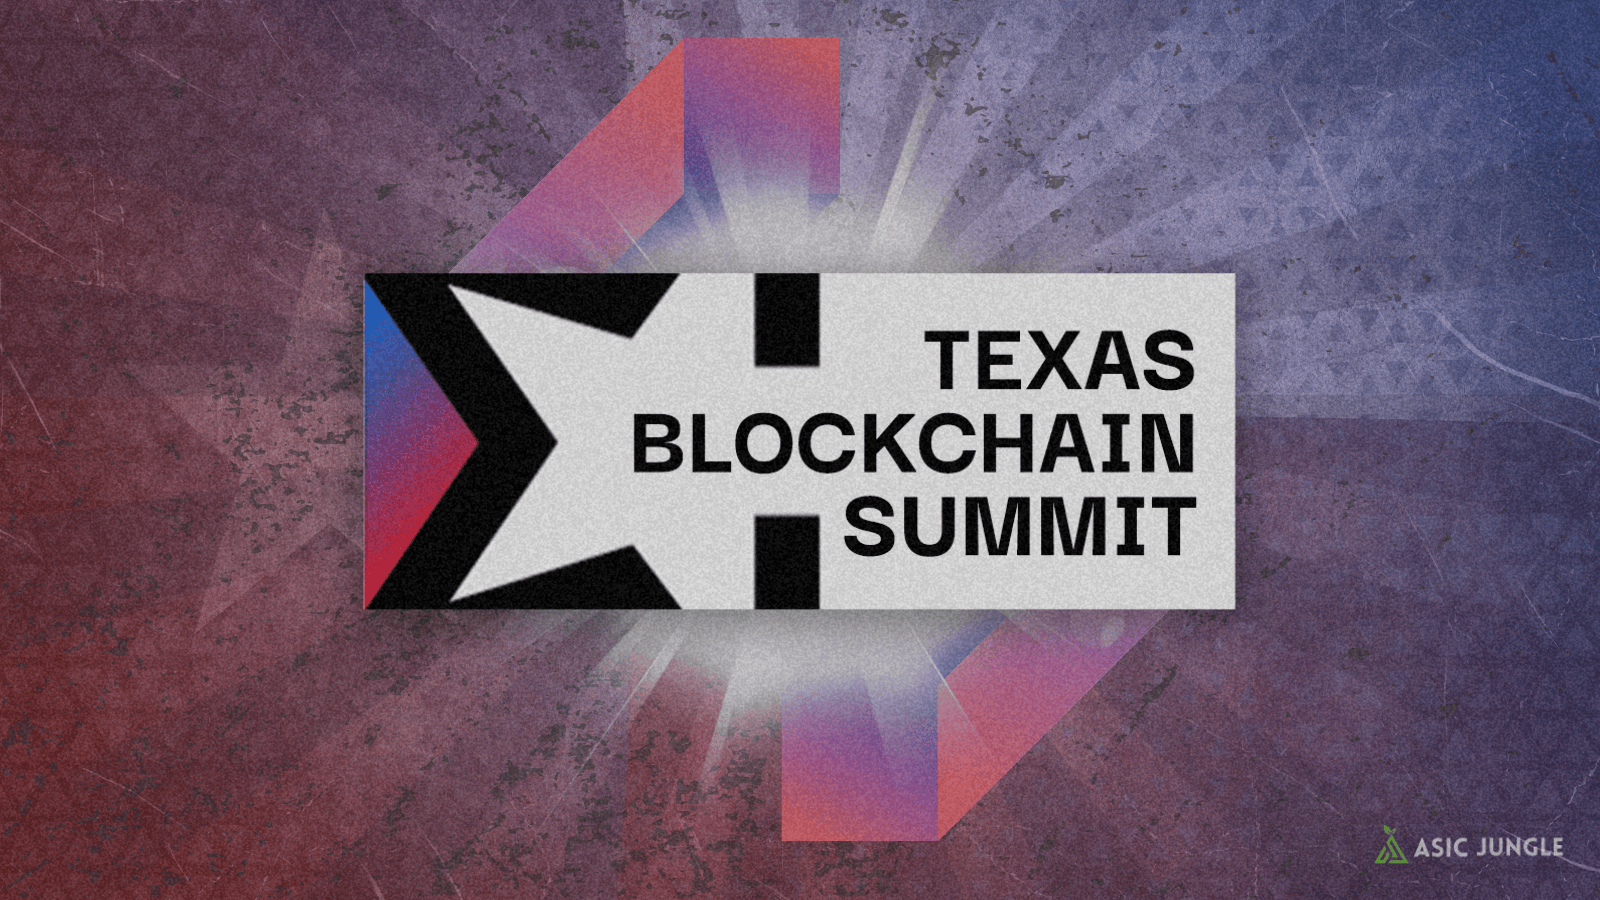 ASIC Jungle’s Inside View of the 2022 Texas Blockchain Summit